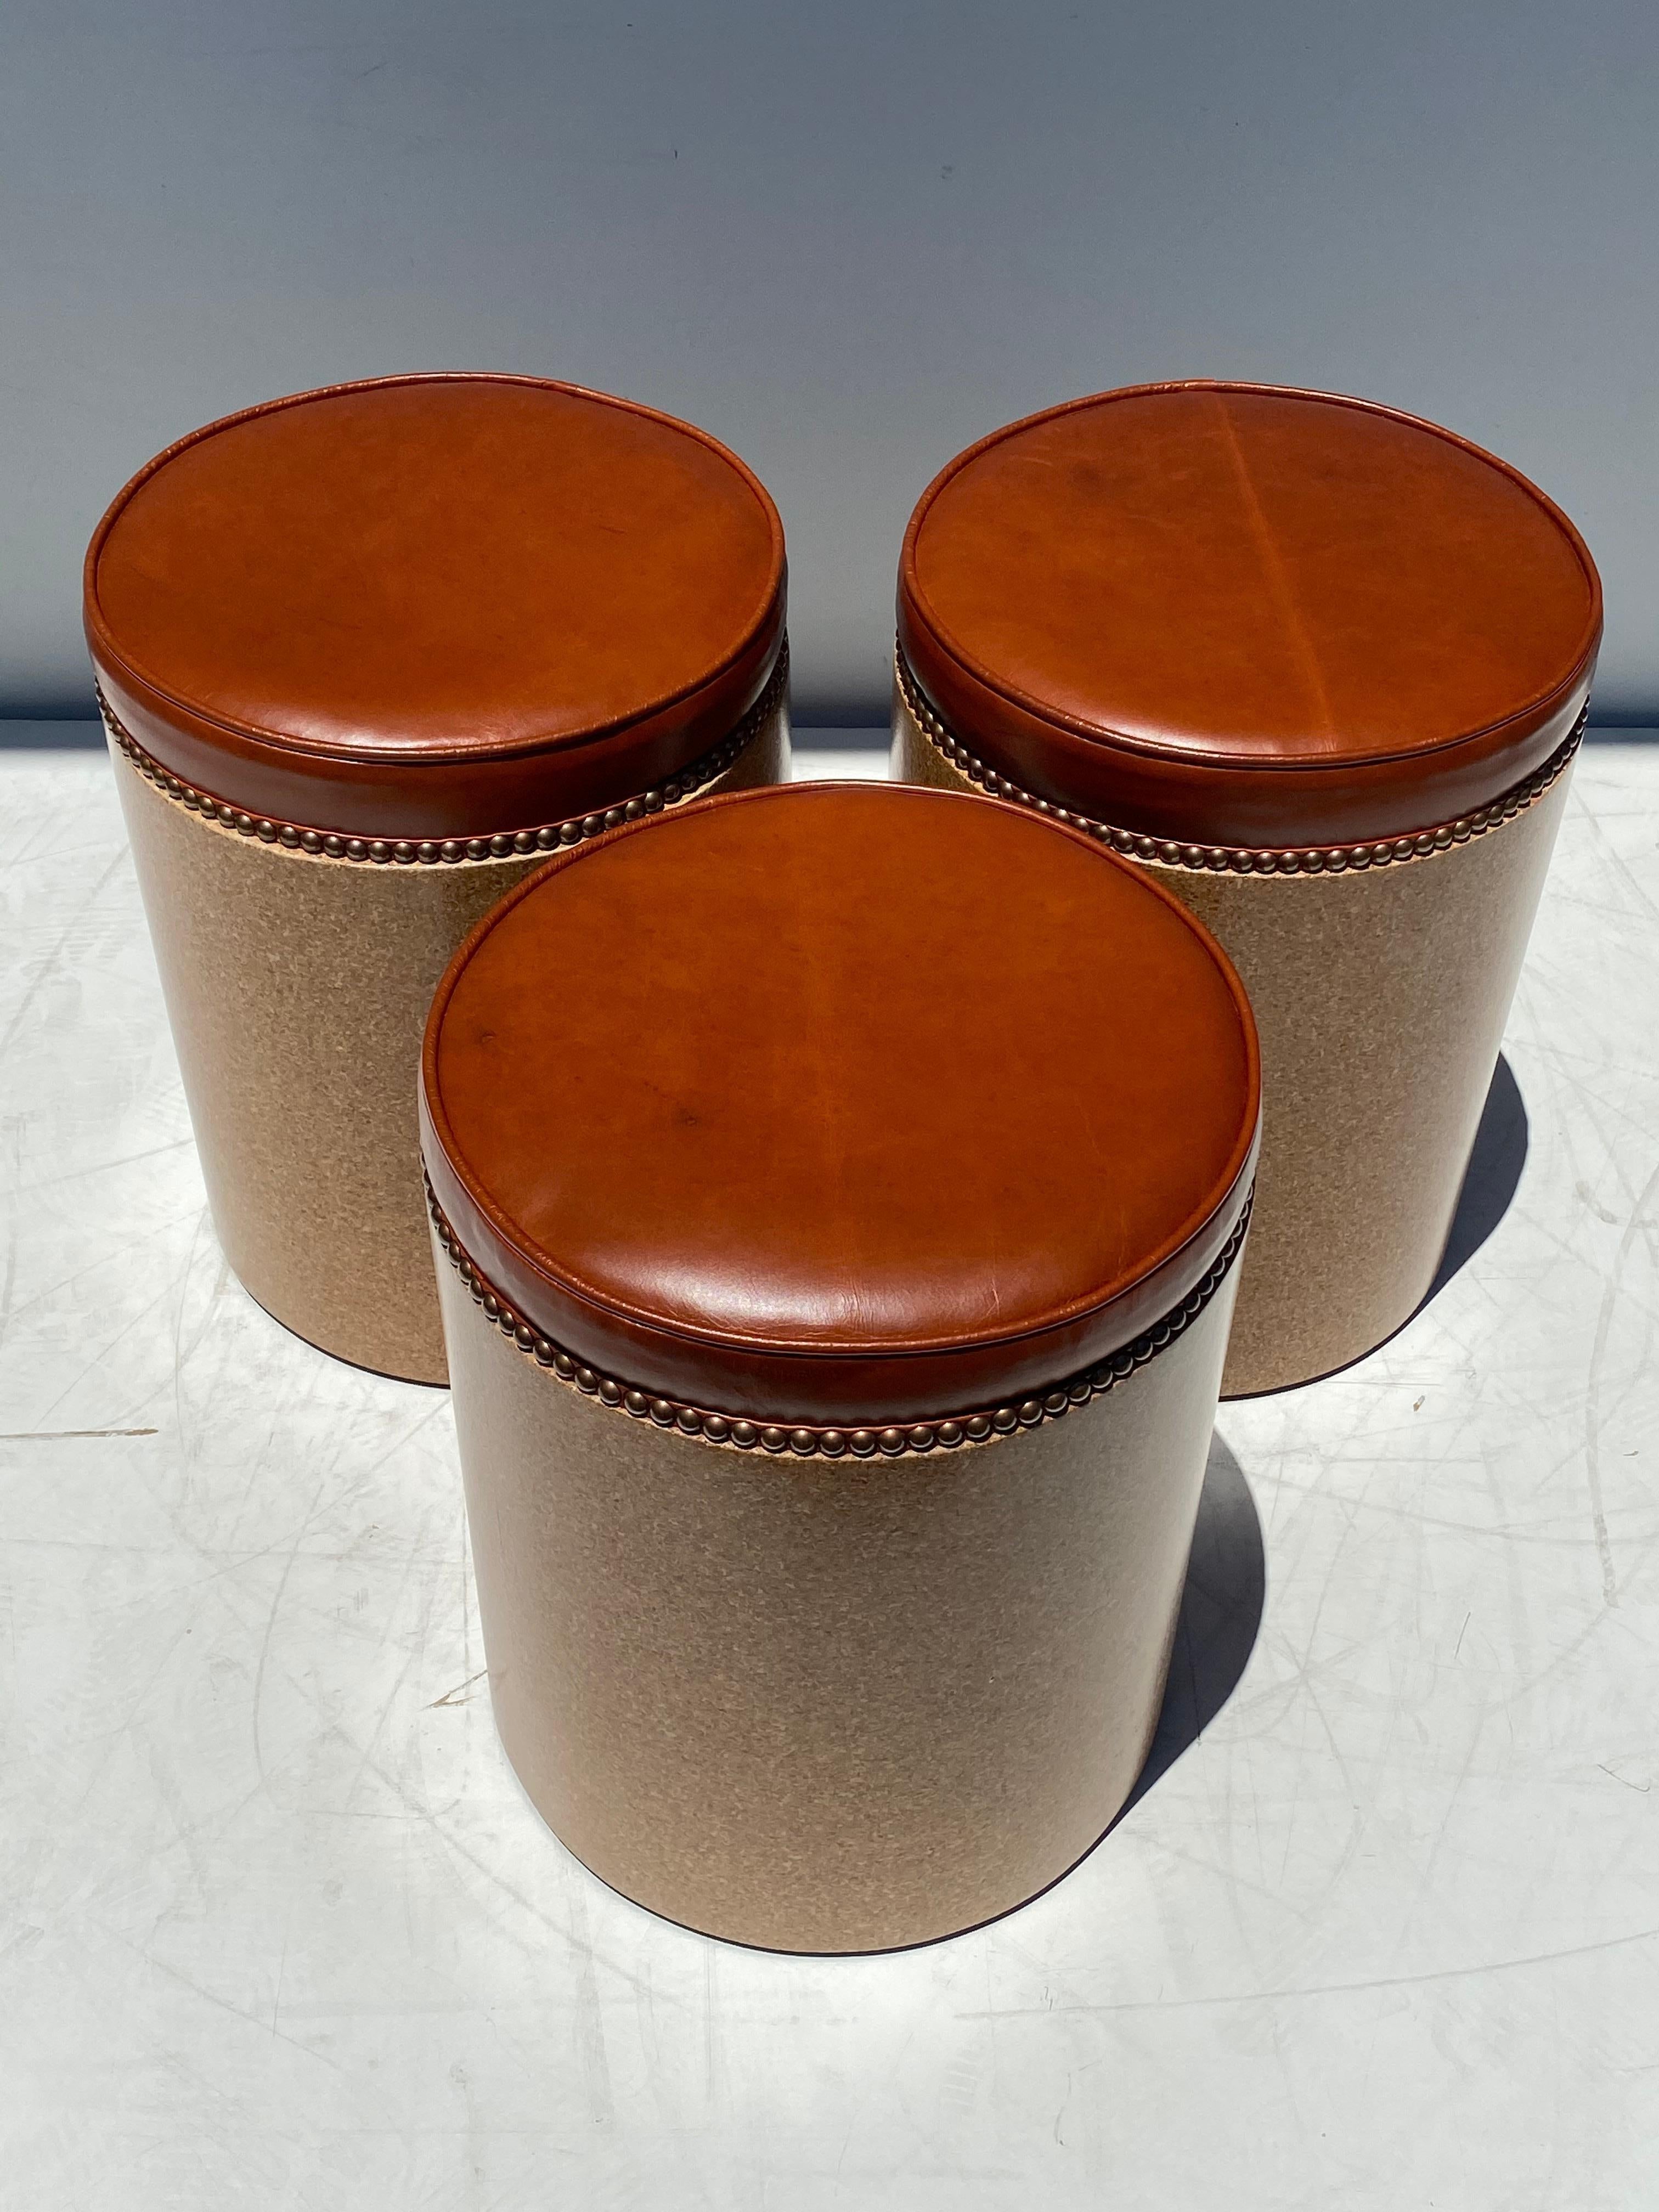 Cork Side Table / Stool in Vintaged Cognac Leather In Good Condition For Sale In North Hollywood, CA